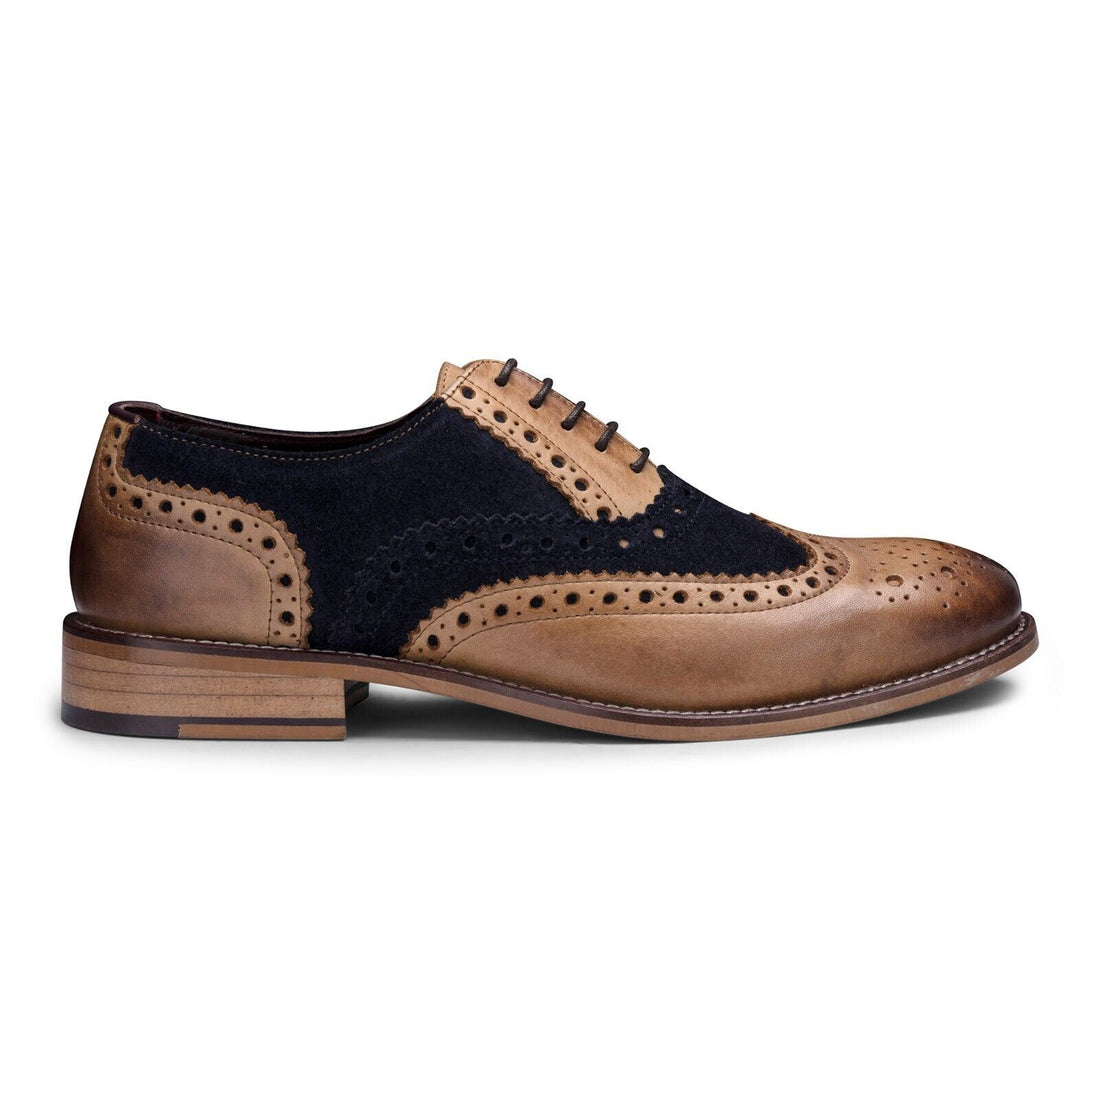 Mens Classic Oxford Tan Leather Gatsby Brogue Shoes with Navy Suede - Upperclass Fashions 